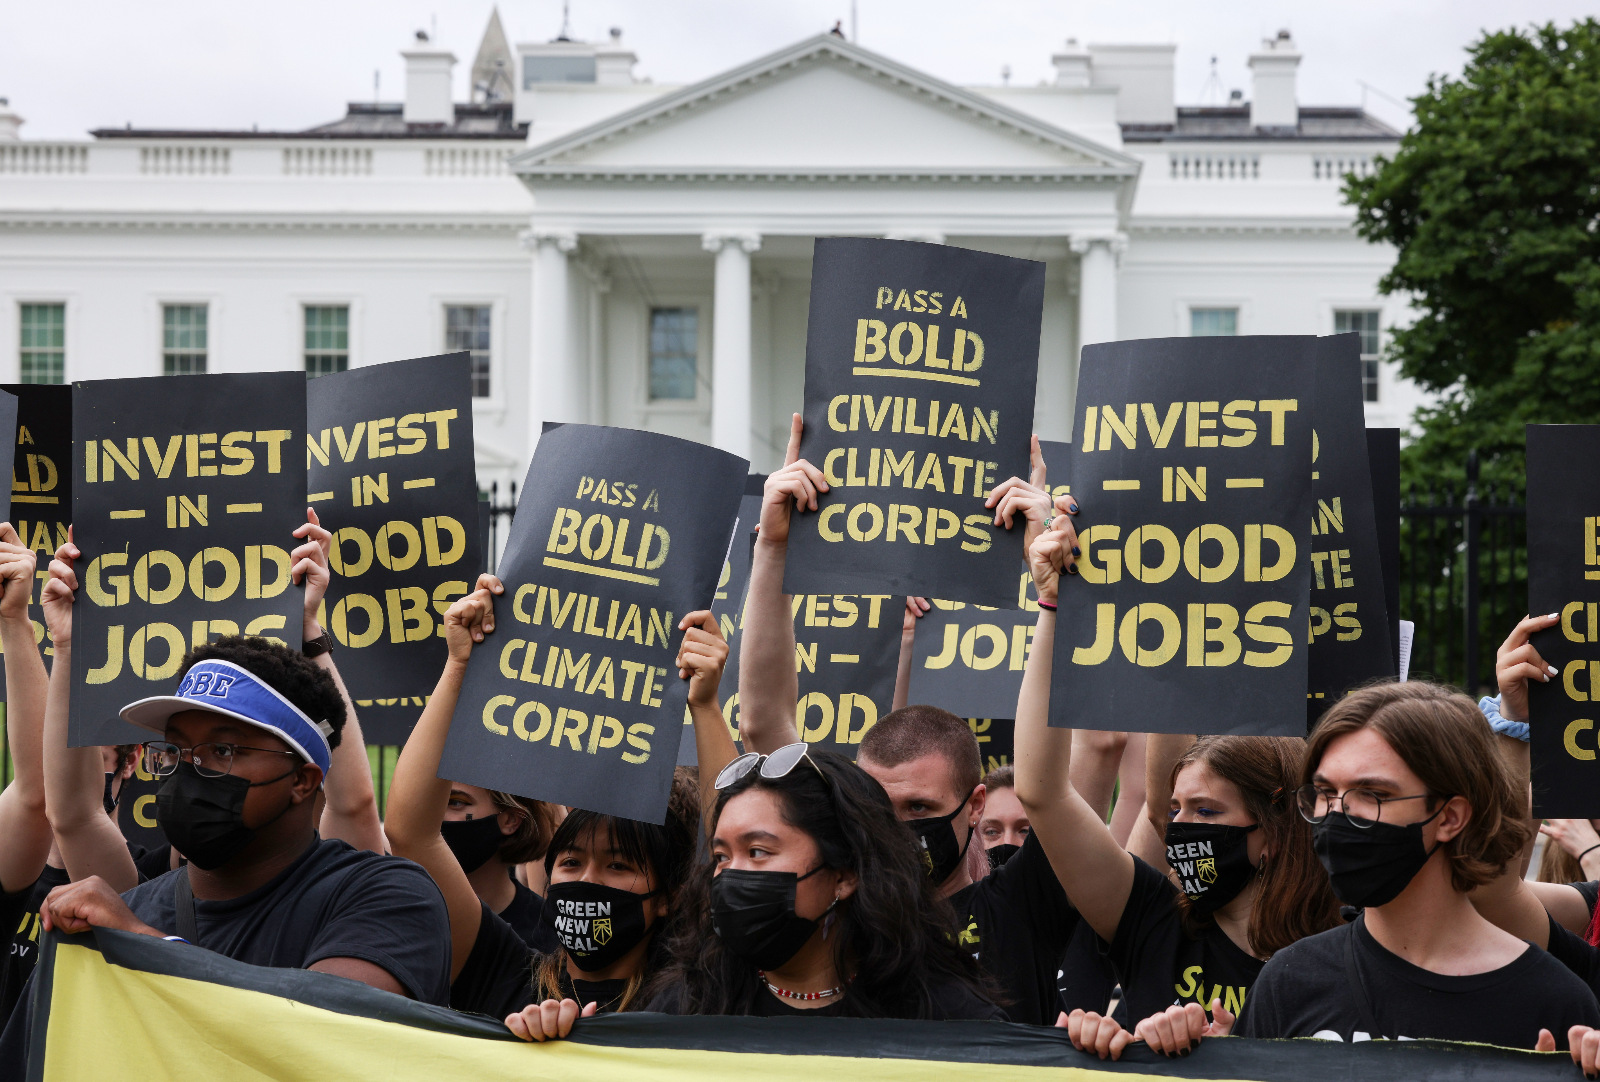 Photo of protesters in front of the White House with signs reading 'invest in good work' and 'pass a brave citizen climate corps'